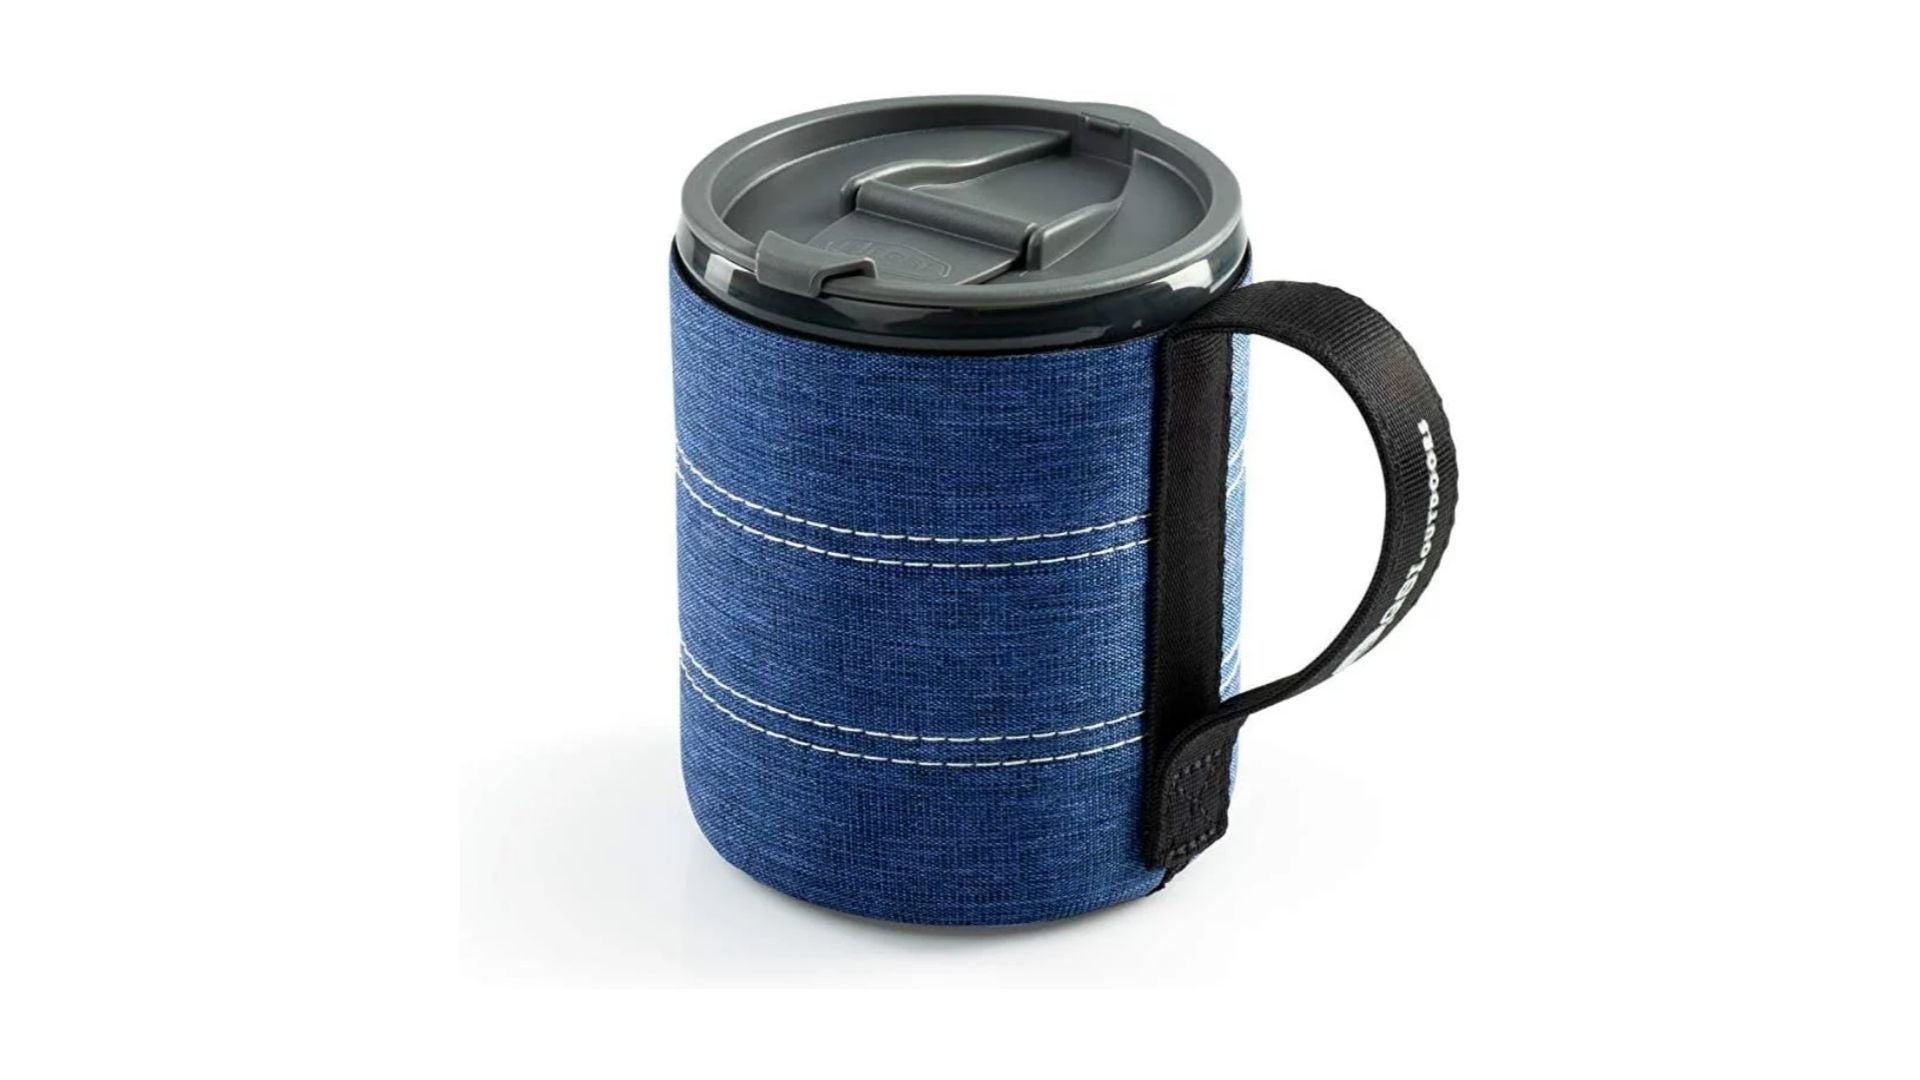 Details about   Camping Aluminum Cup Outdoor Mug Coffee Tourism Tableware Cooking Equipment New 